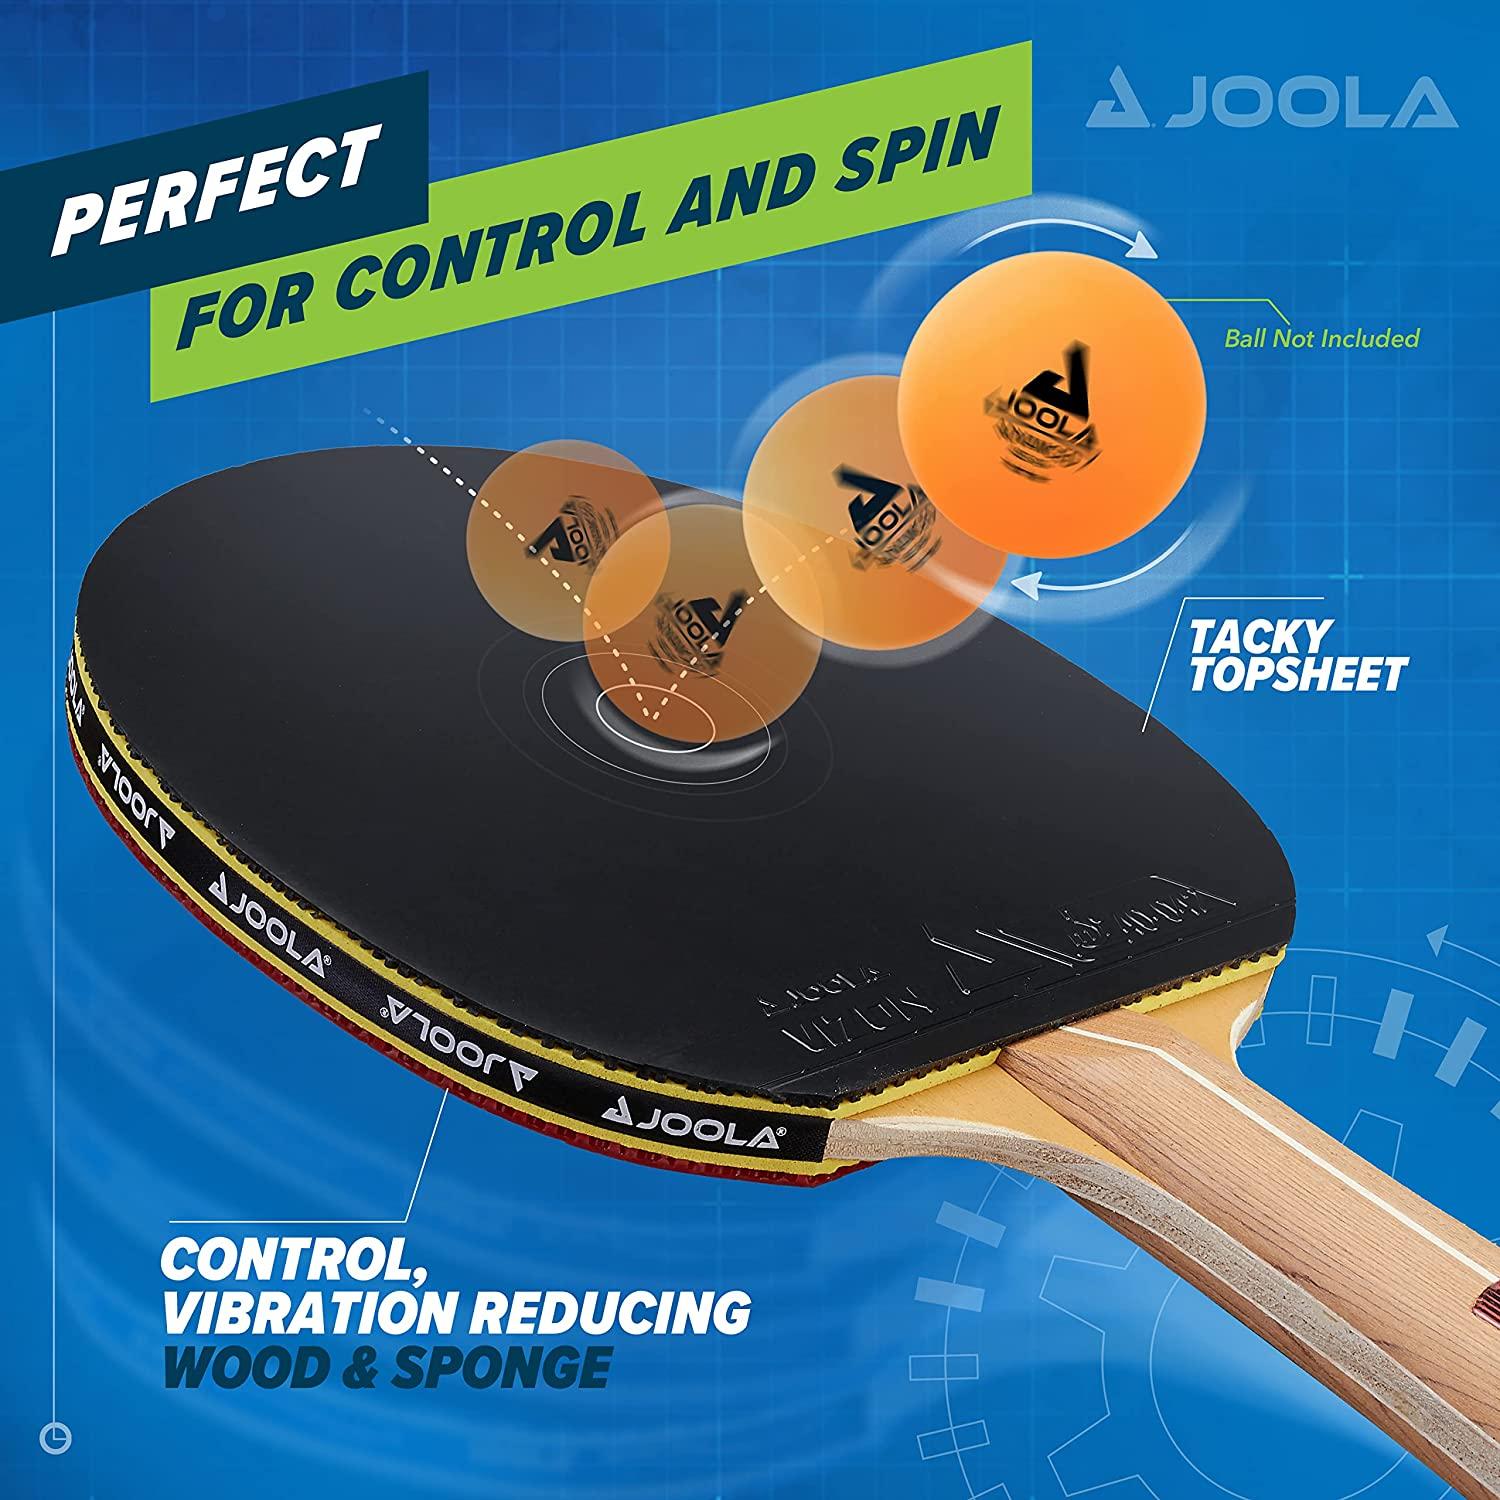 JOOLA Omega Control - Tournament Peformance Ping Pong Paddle - Table Tennis Racket for Advanced Training with Flared Handle - Includes Adapter 32 Table Tennis Rubber